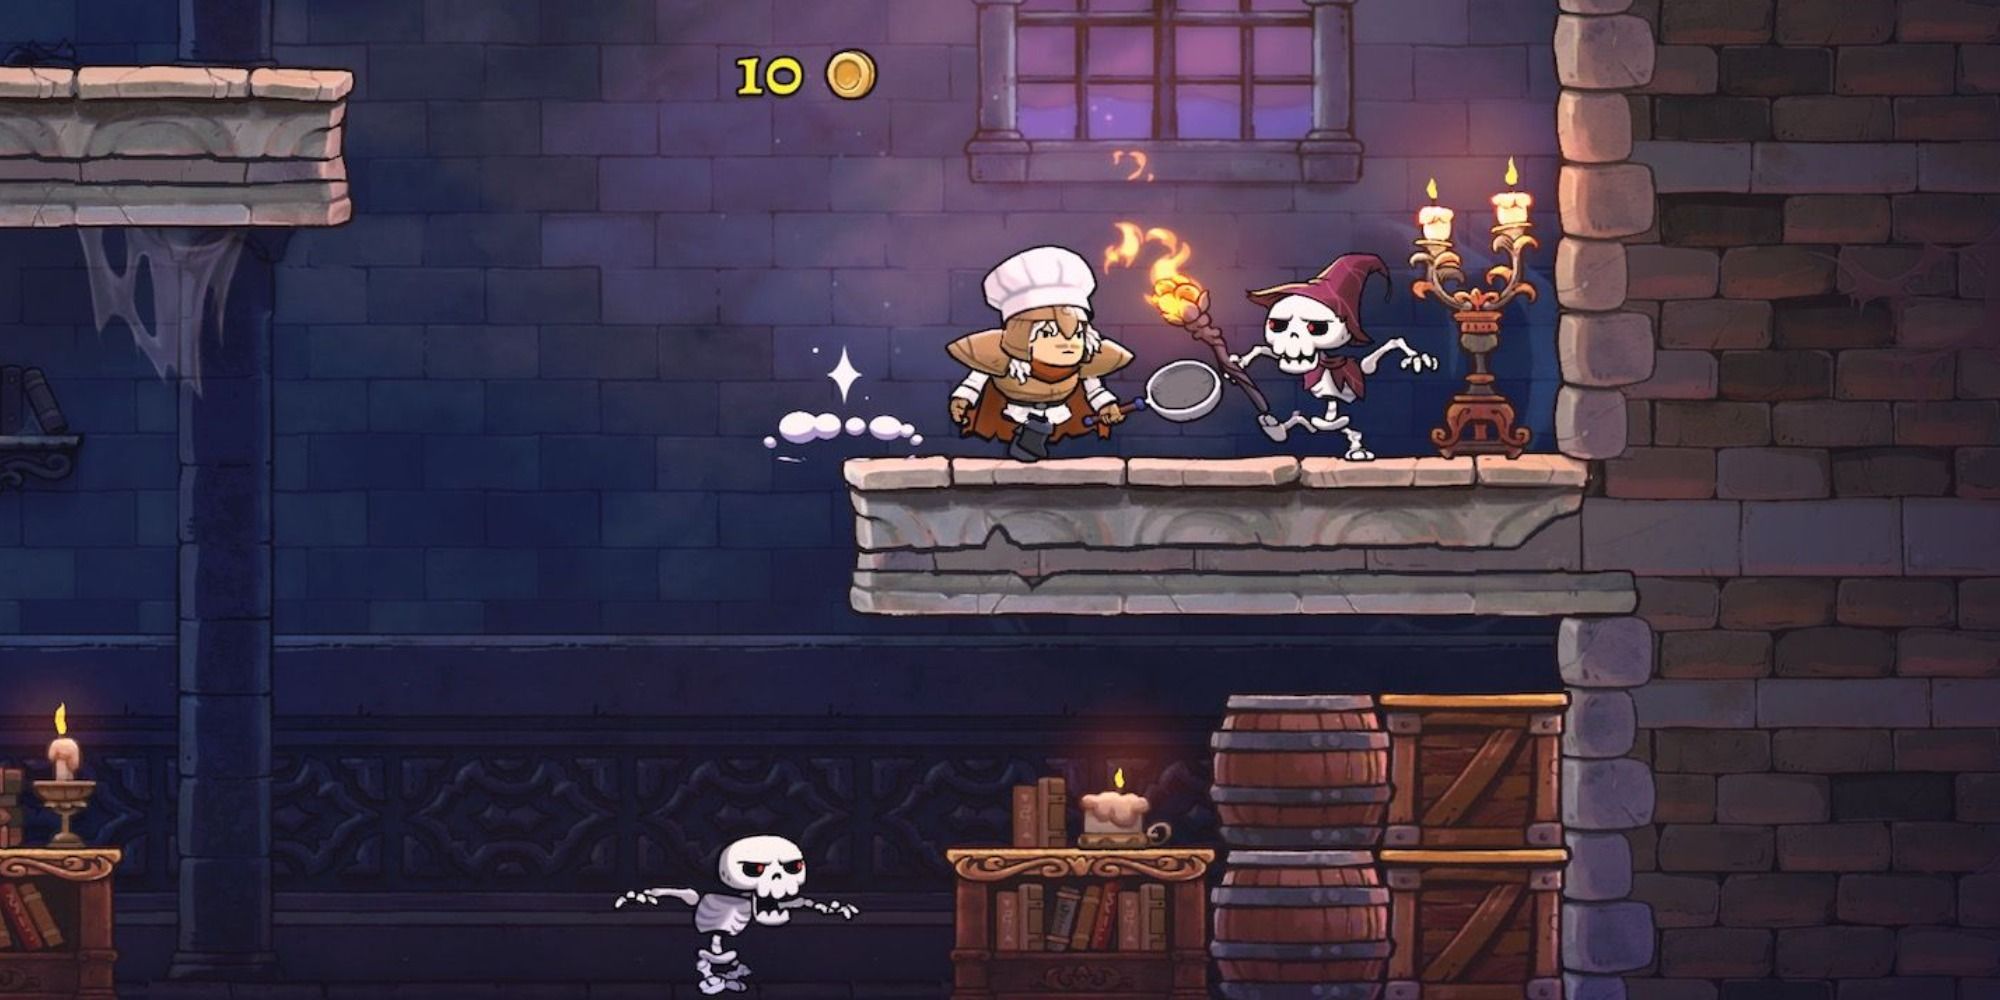 A Chef heir fighting two skeletons in Rogue Legacy 2